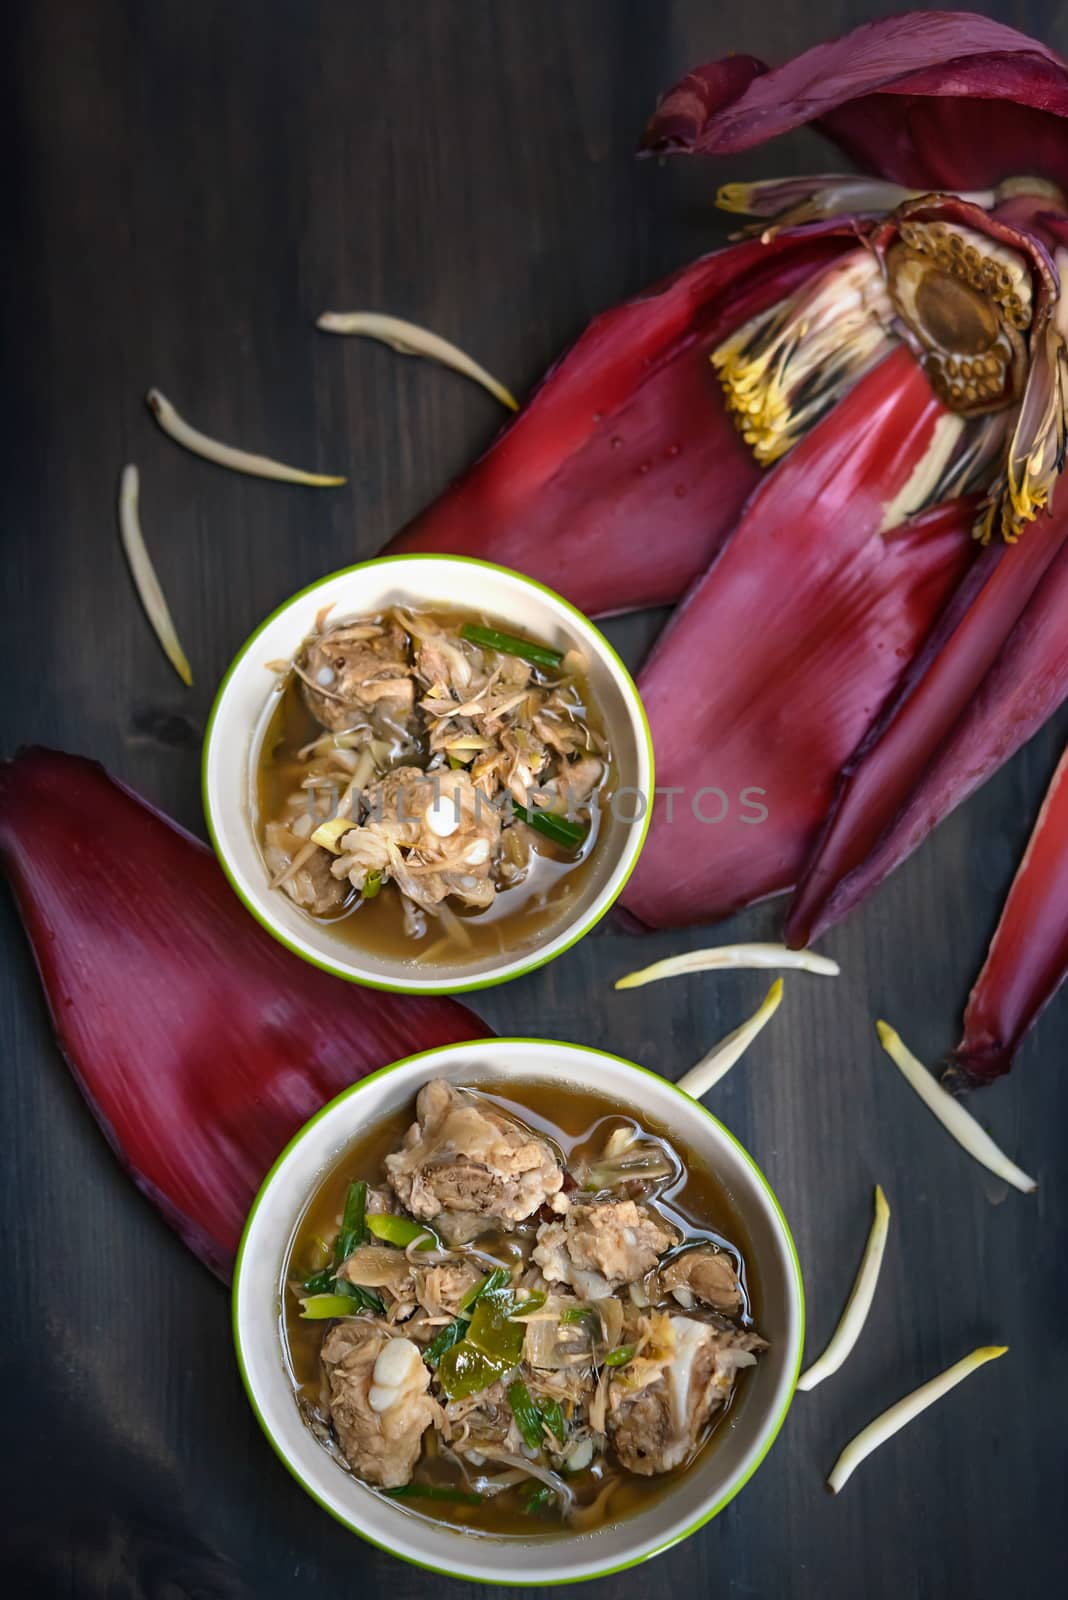 Spicy soup with pork and banana blossom by rakratchada